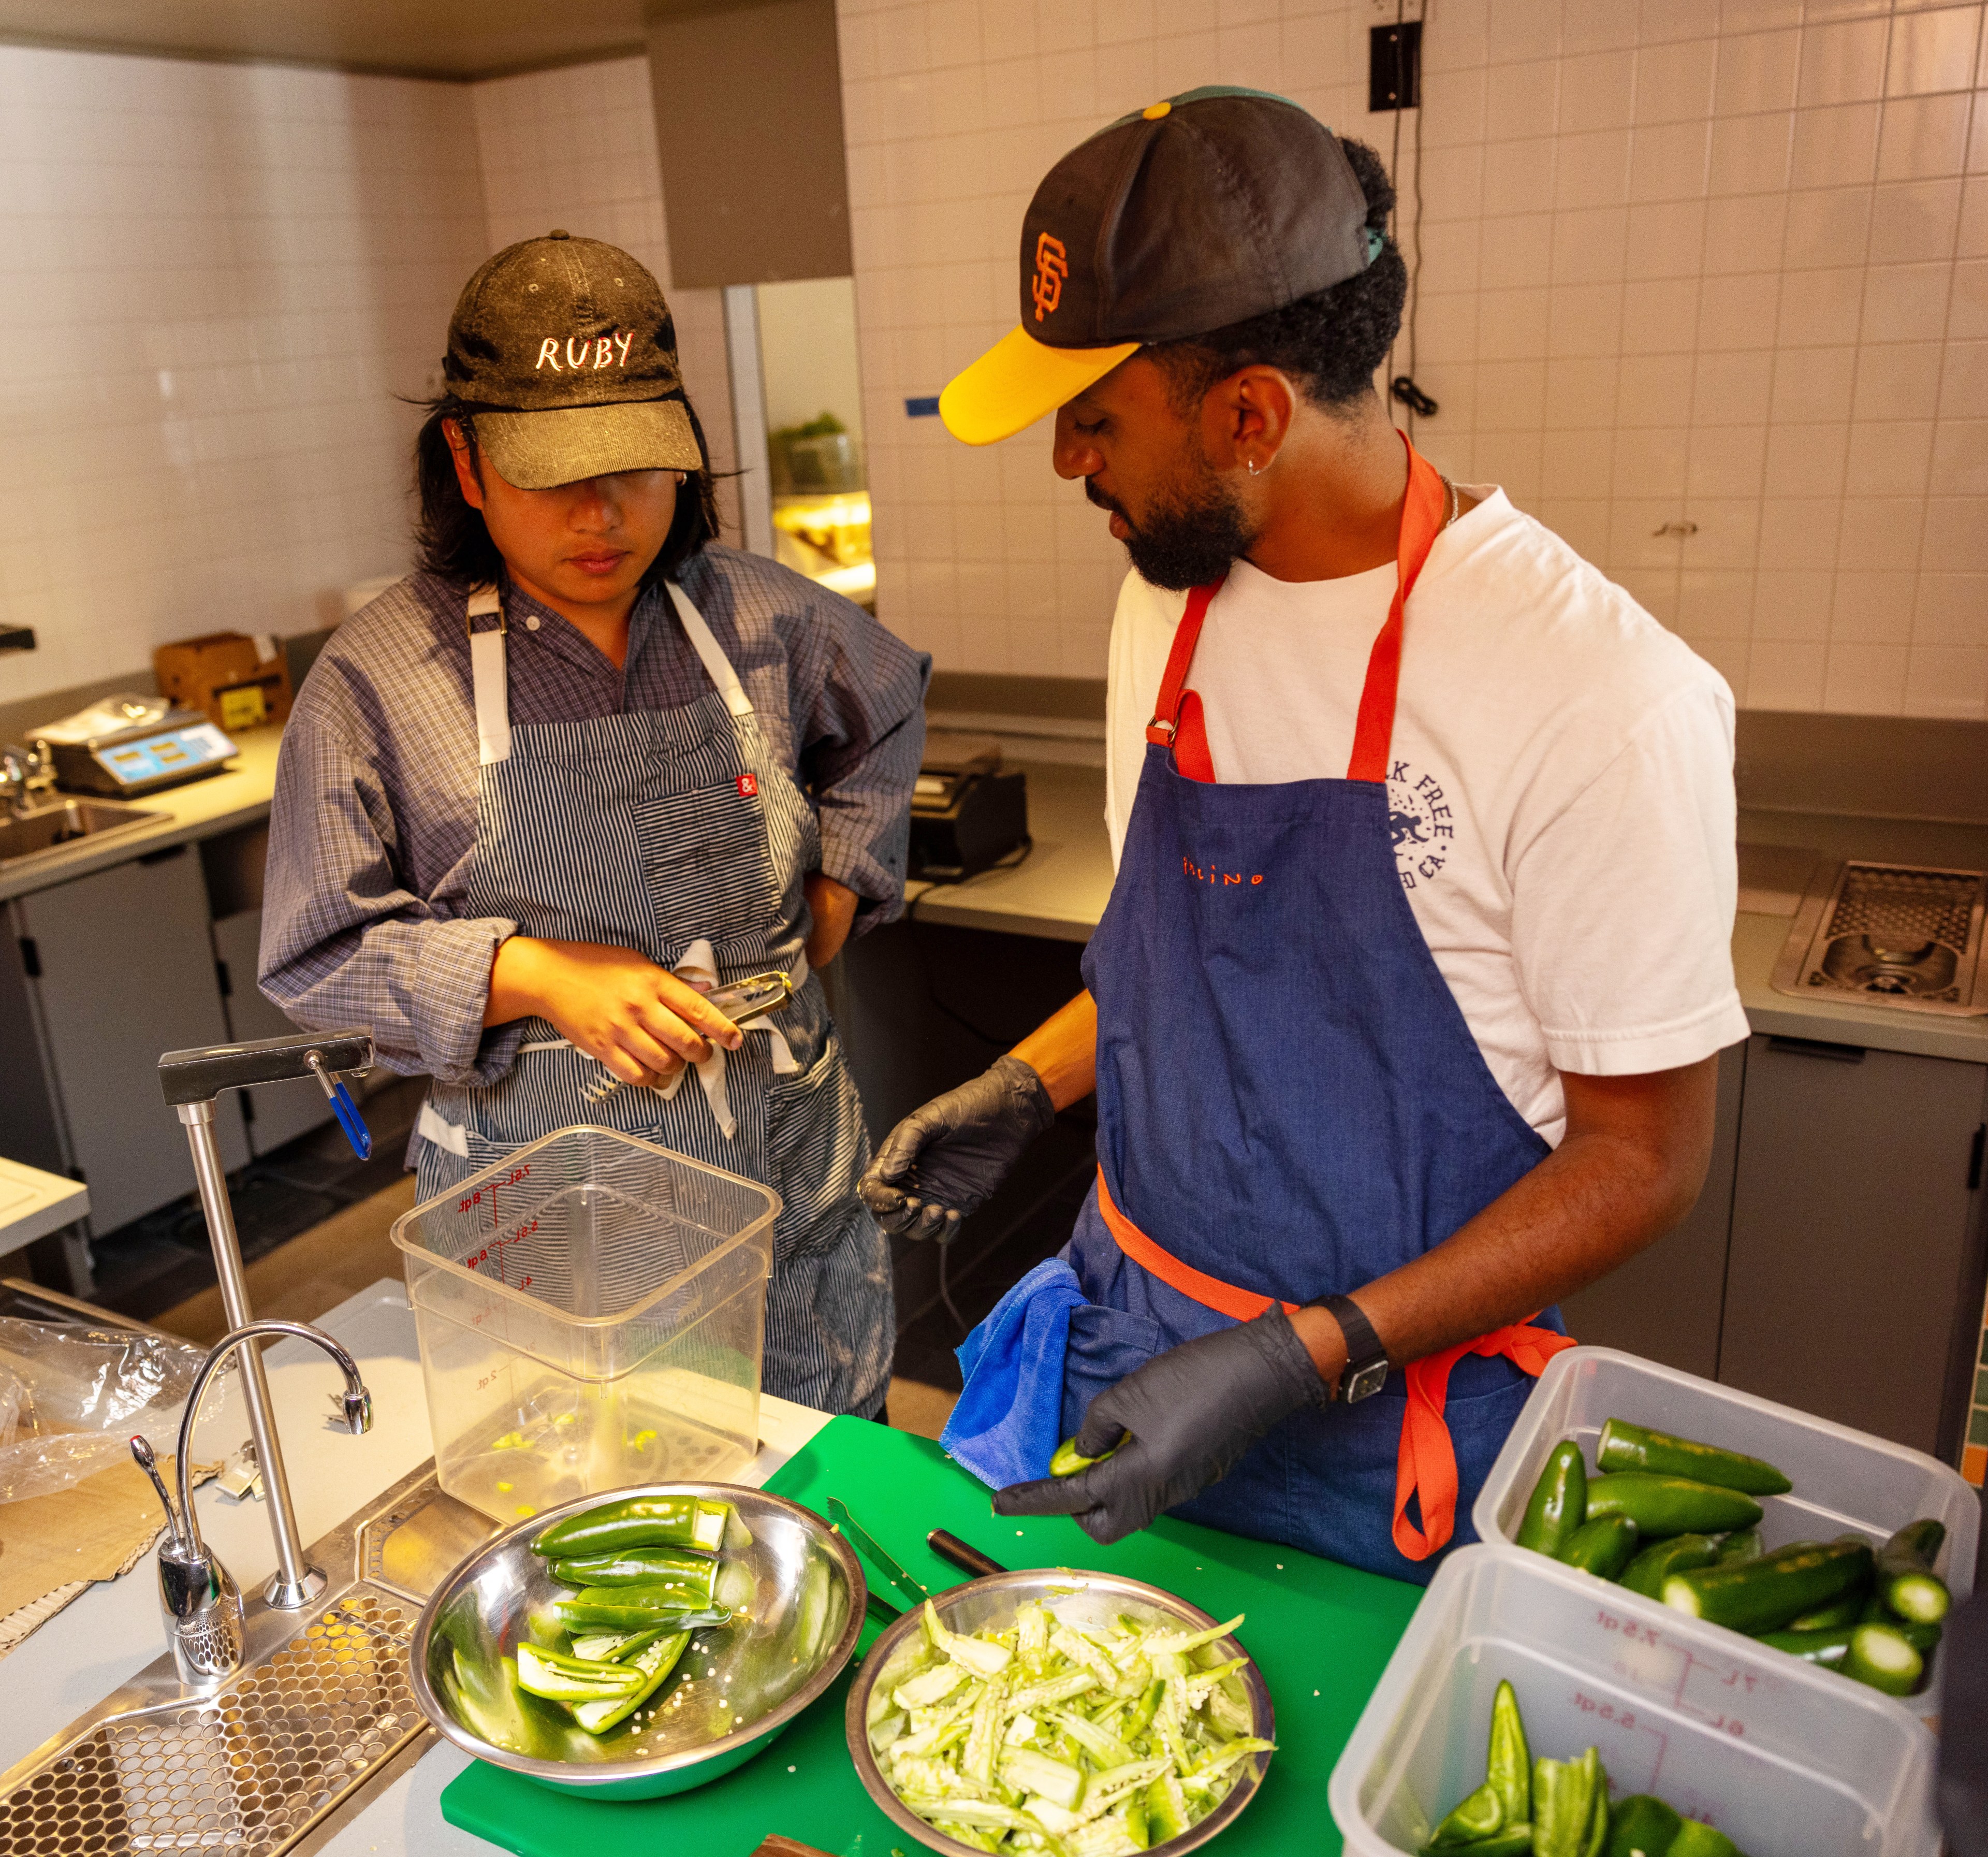 Two individuals are in a kitchen, both wearing aprons and caps. One is holding tongs, while the other is slicing green peppers on a cutting board. Bowls of sliced peppers are on the counter.